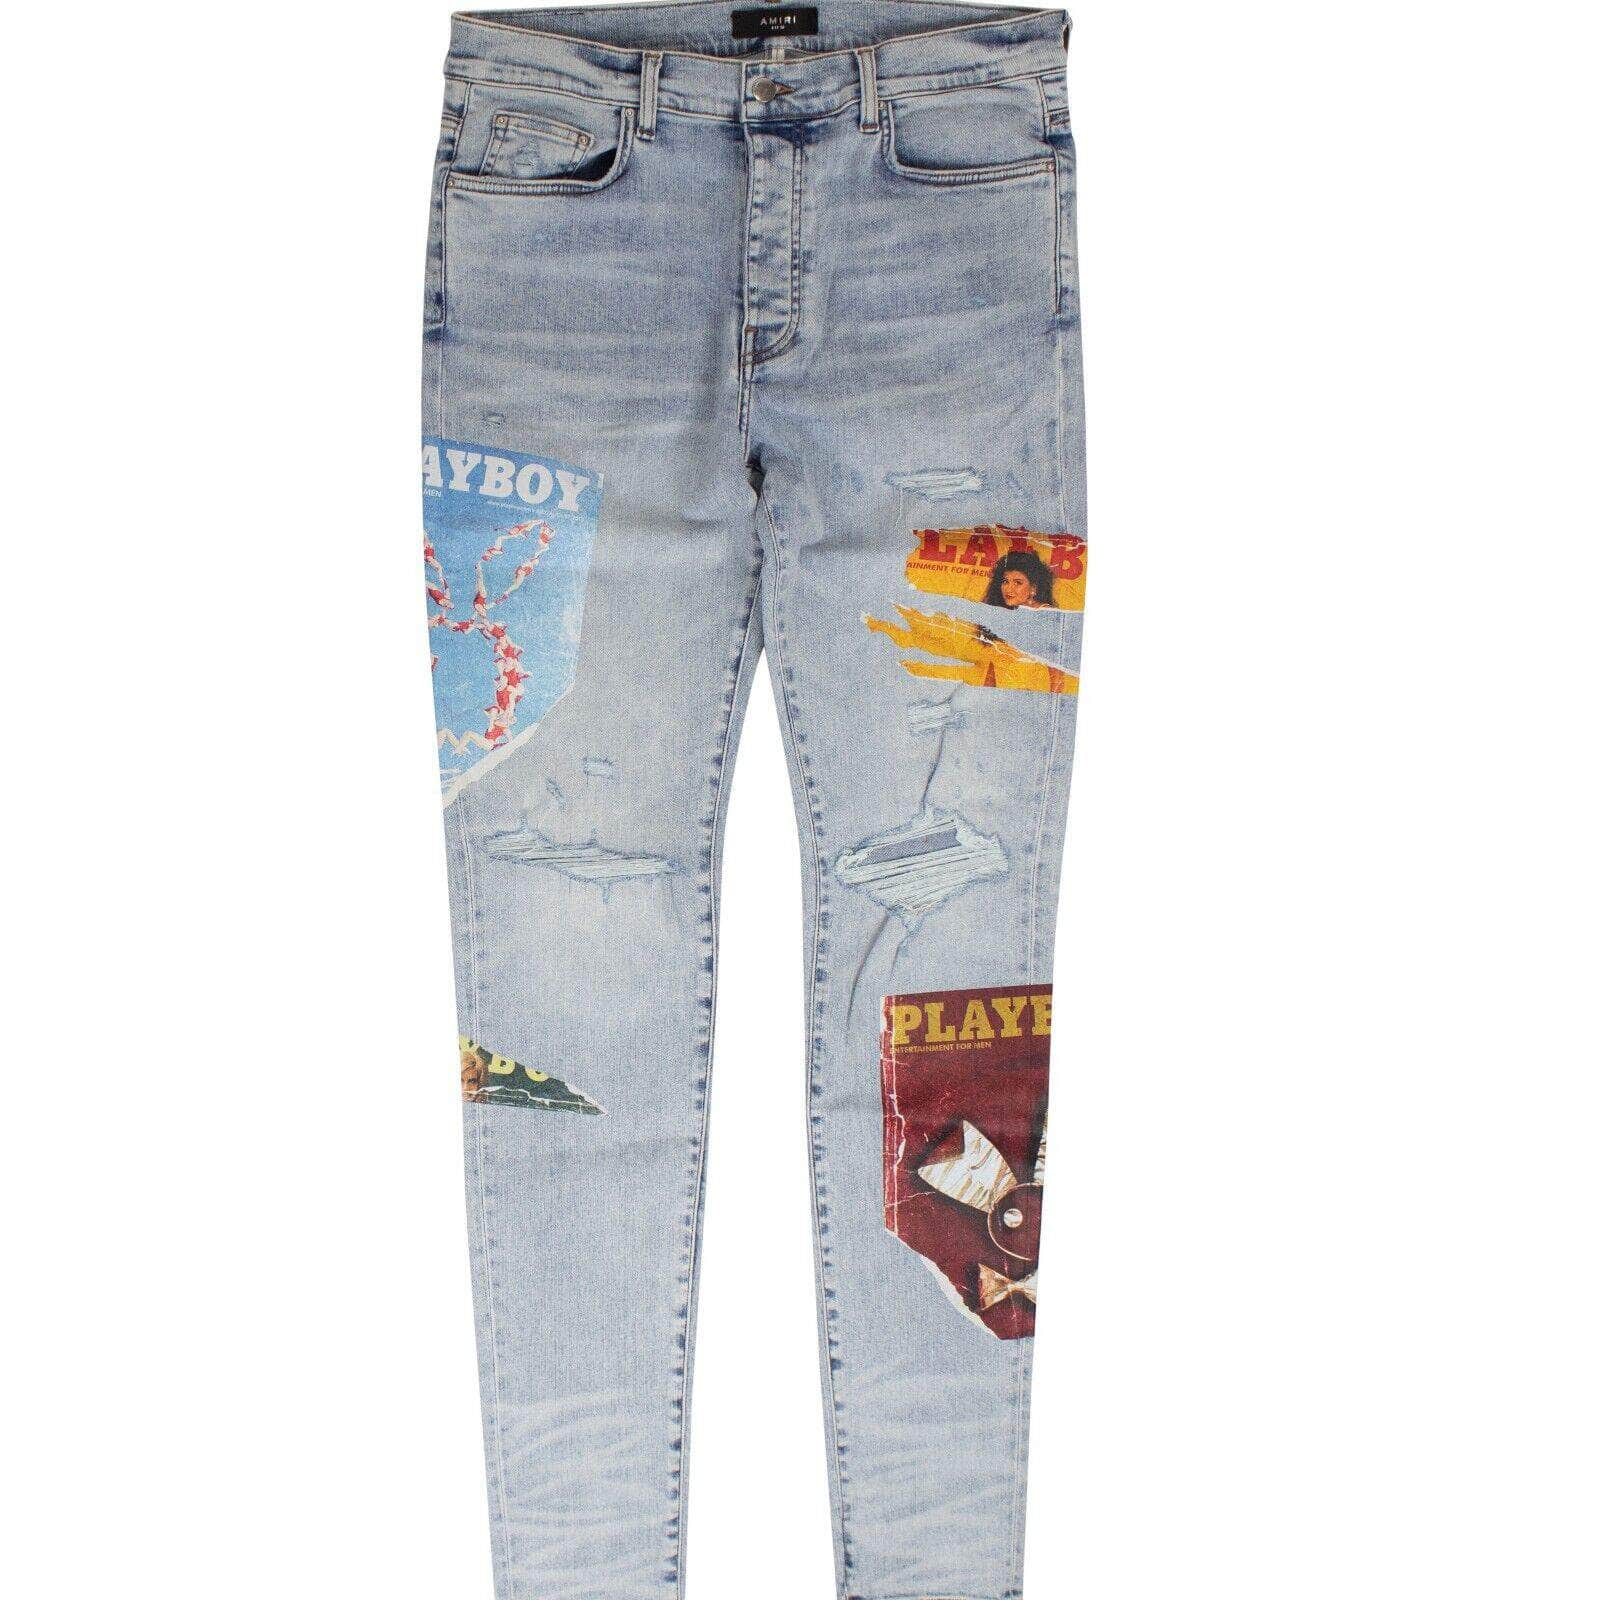 Amiri 750-1000, amiri, channelenable-all, chicmi, couponcollection, gender-mens, main-clothing, mens-shoes, mens-skinny-jeans, size-36 36 / AMR-XJNS-0060/36 Blue Playboy Magazine Jeans AMR-XJNS-0060/36 AMR-XJNS-0060/36